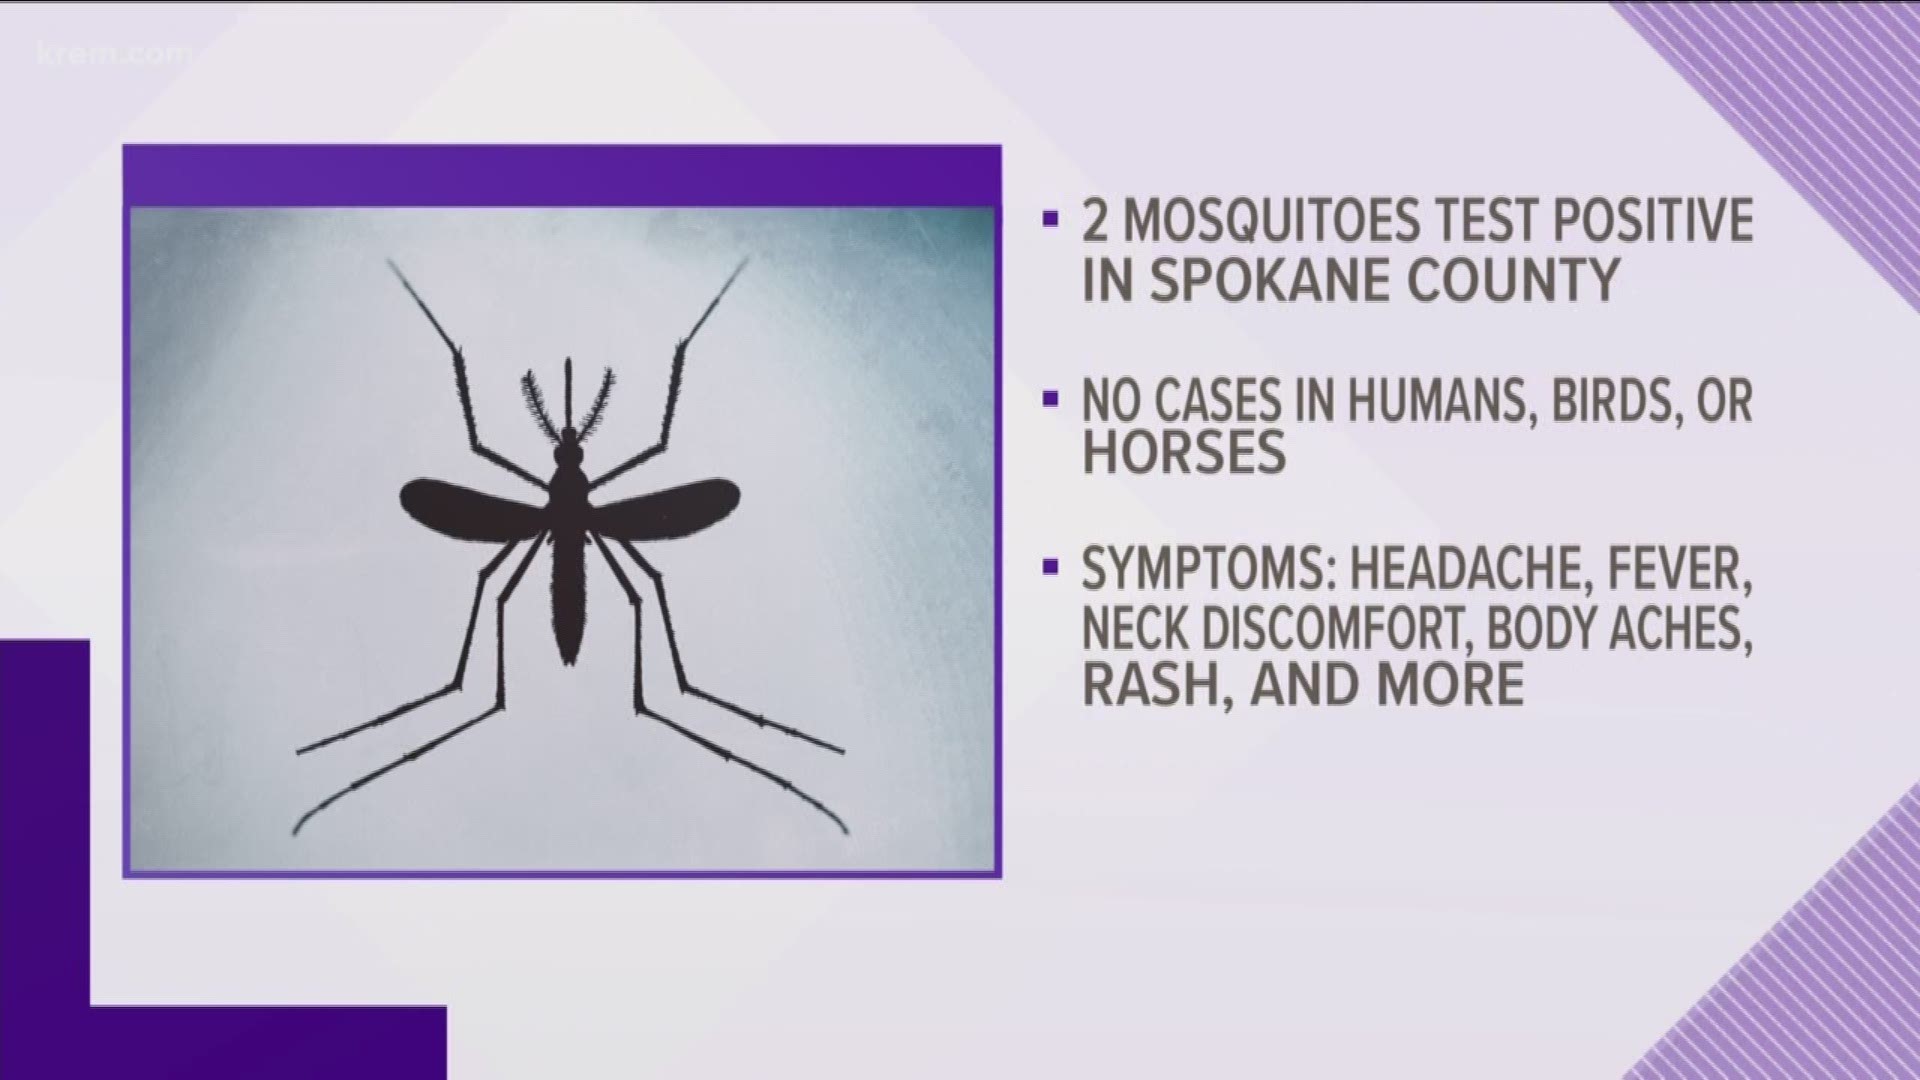 Spokane Co. mosquitoes test positive for West Nile virus